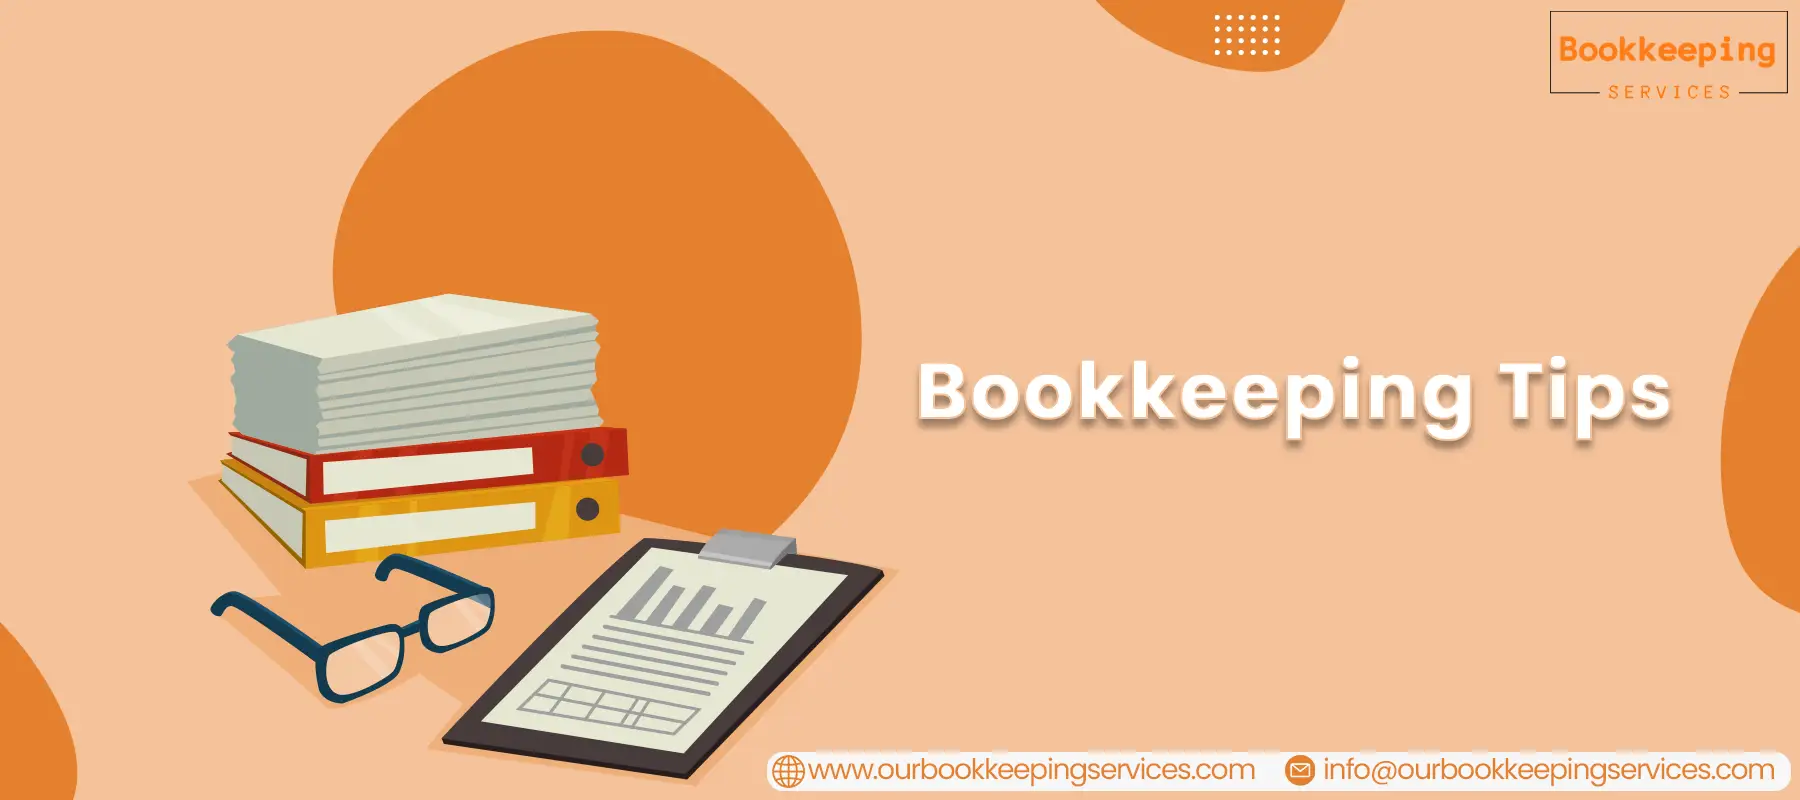 Excellent bookkeeping tips for business